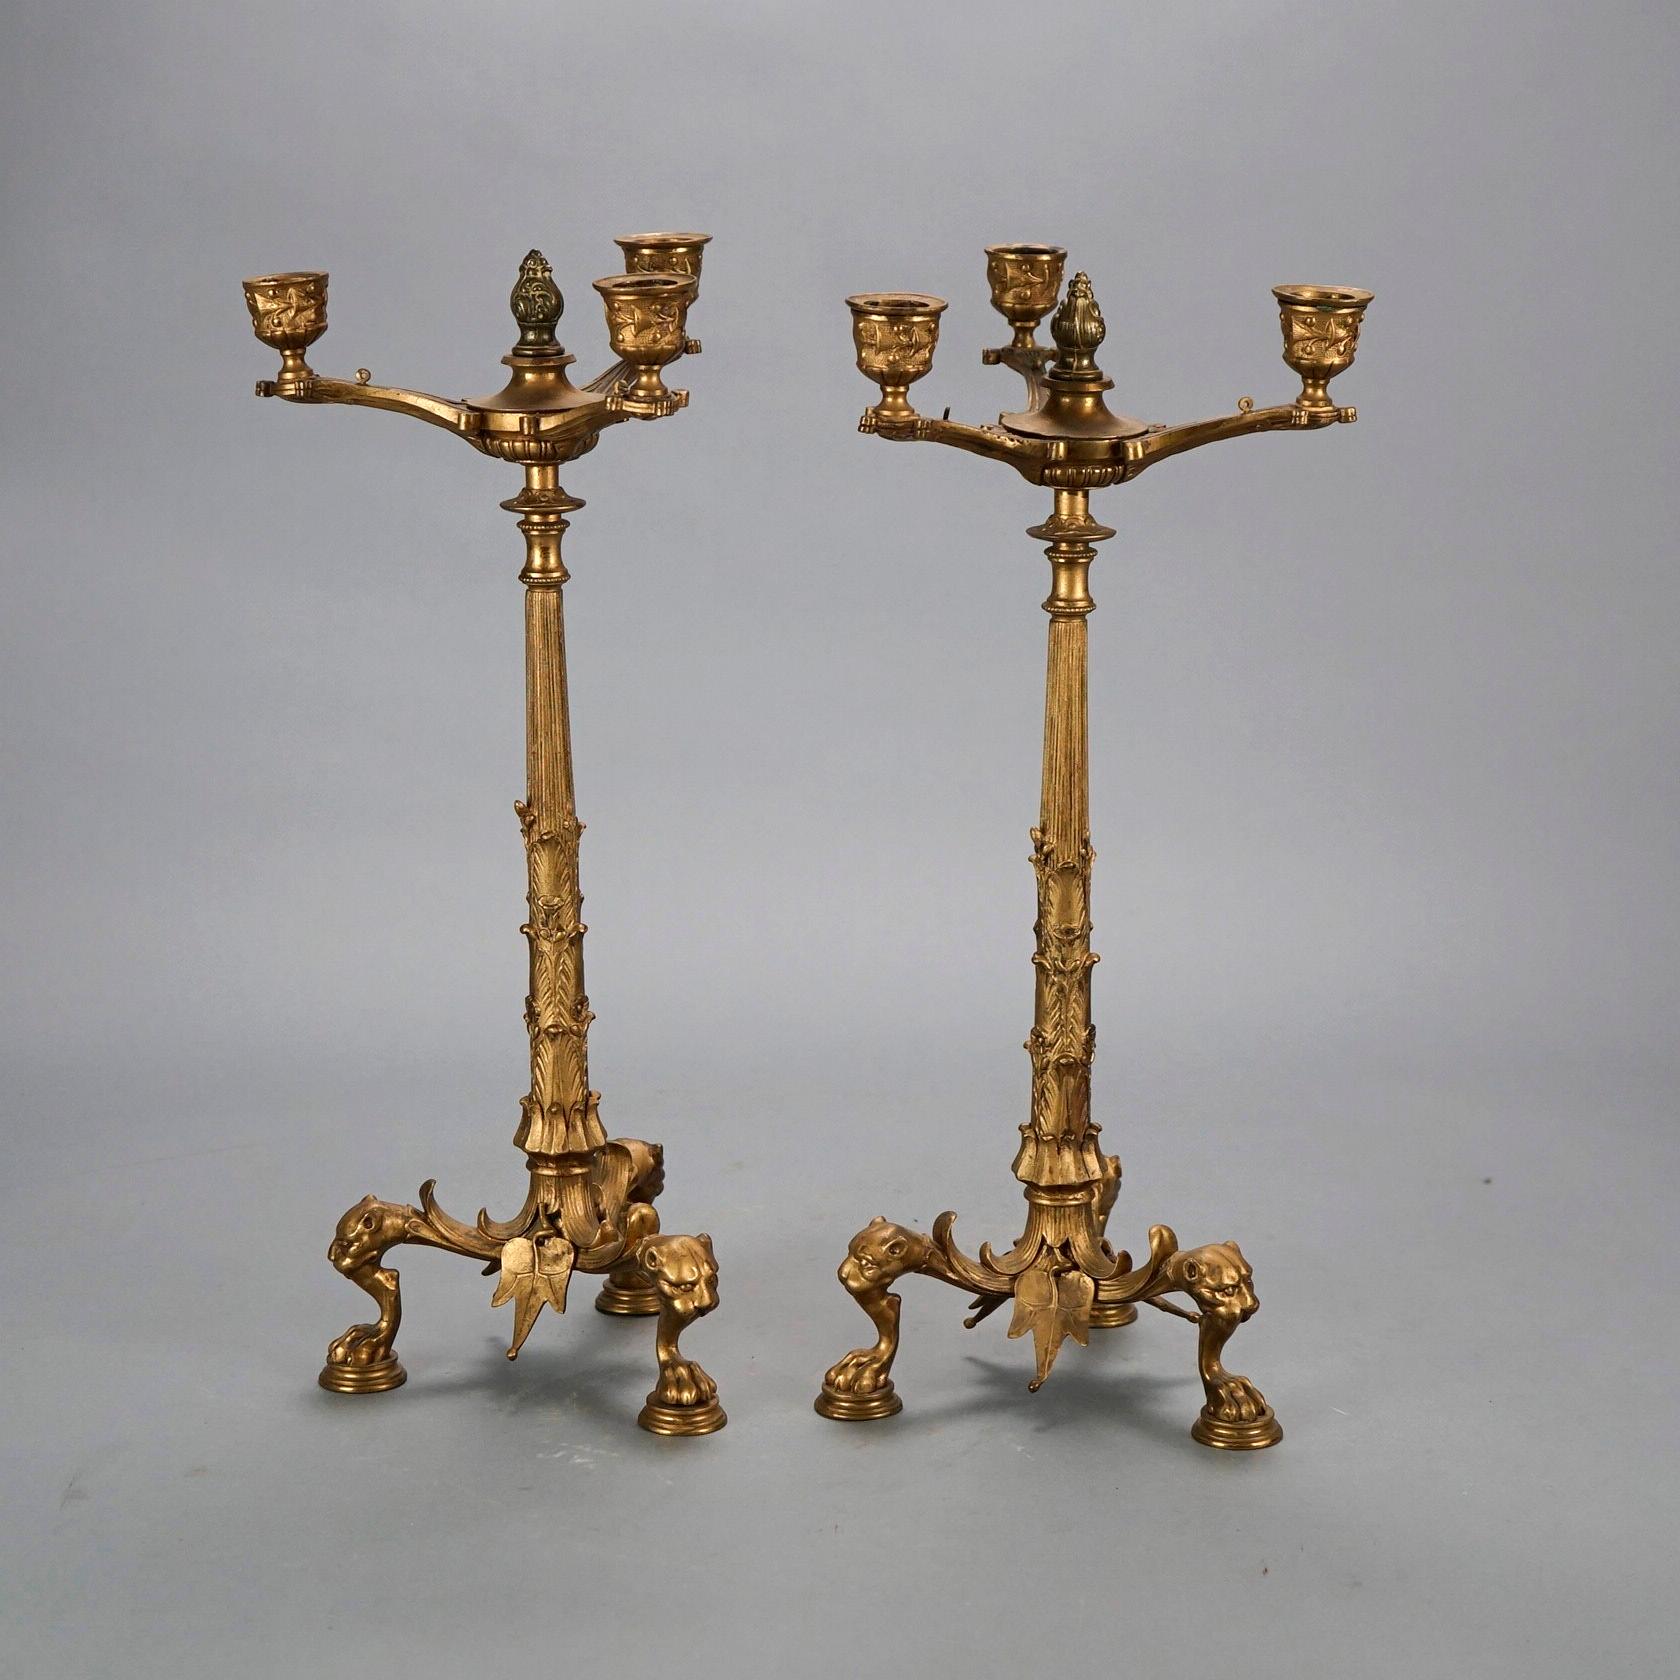 An antique Classical cast bronze figural candelabra offers three candle sockets, raised on foliate form column with base having lion masks at knees and paw feet, foliate elements throughout, 19th century

Measures- 16.75''H x 7''W x 7''D